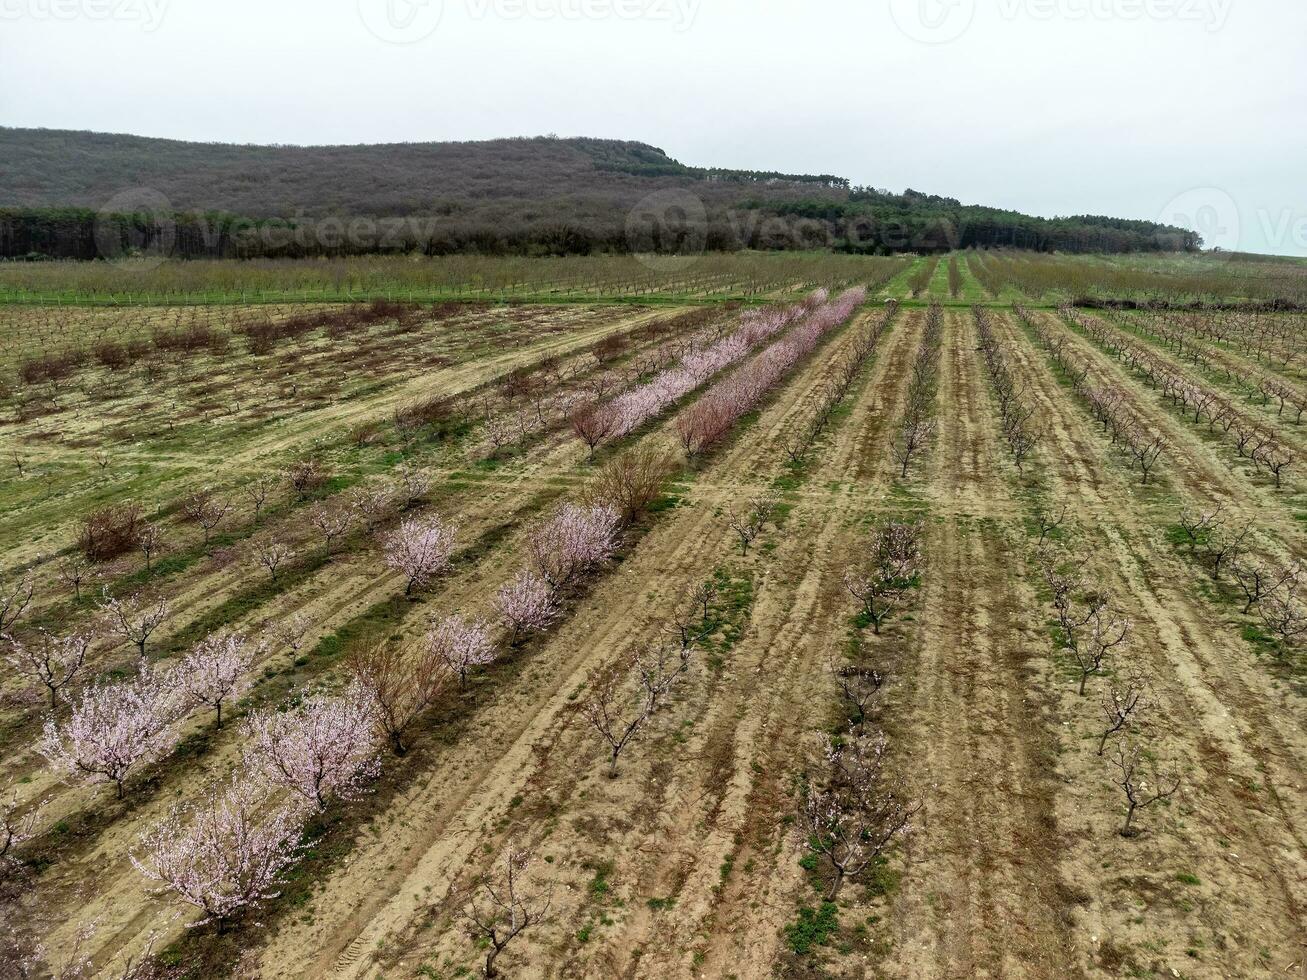 Aerial view of blooming peach trees at a fruit farm arranged in rows. Peach garden, row of blooming trees, pink flowers on the branches starting to bloom. Produce, agriculture, farming concept photo